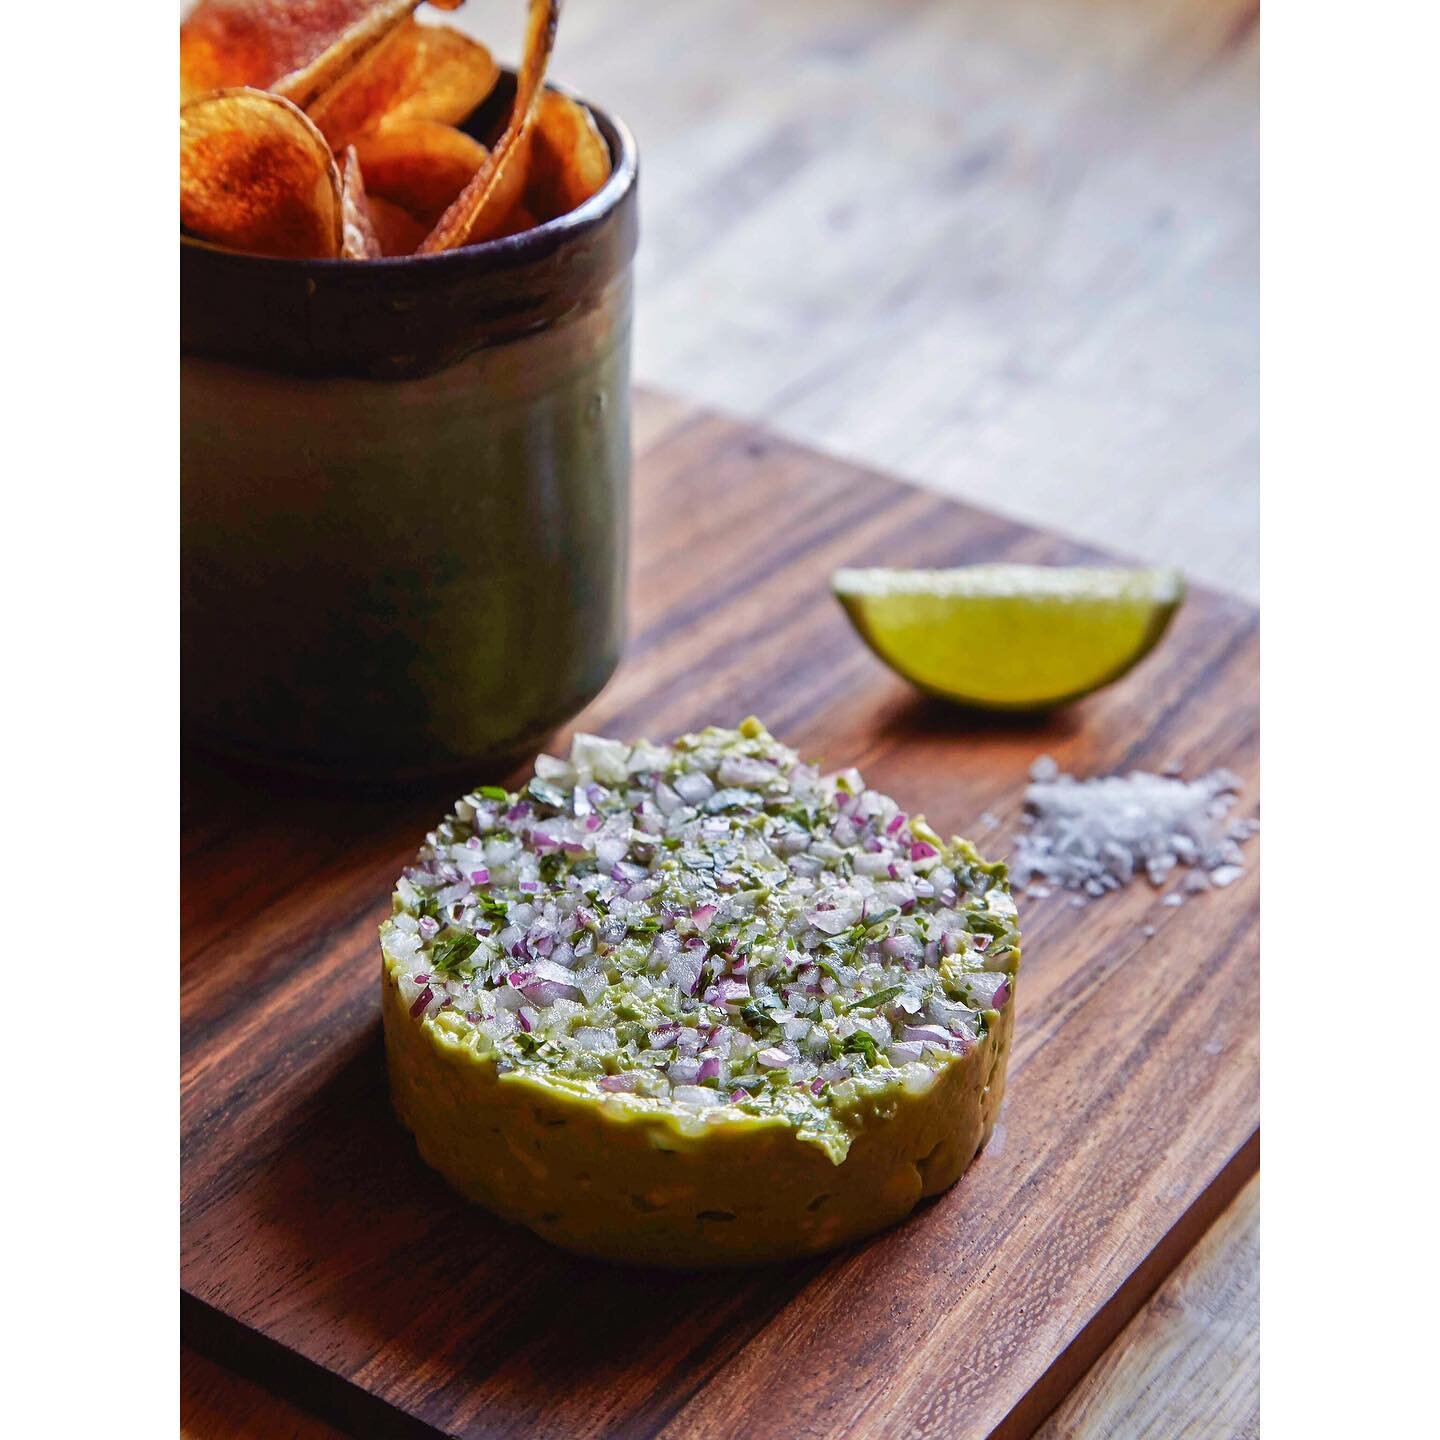 TAKUMEN GUACAMOLE
Our take on everyone&rsquo;s favorite appetizer. Served with homemade potato chips. 
*Available only for dine-in at dinner time

#guacamole #avocadolover

&mdash;&mdash;&mdash;&mdash;&mdash;&mdash;
Now we&rsquo;re serving a full men